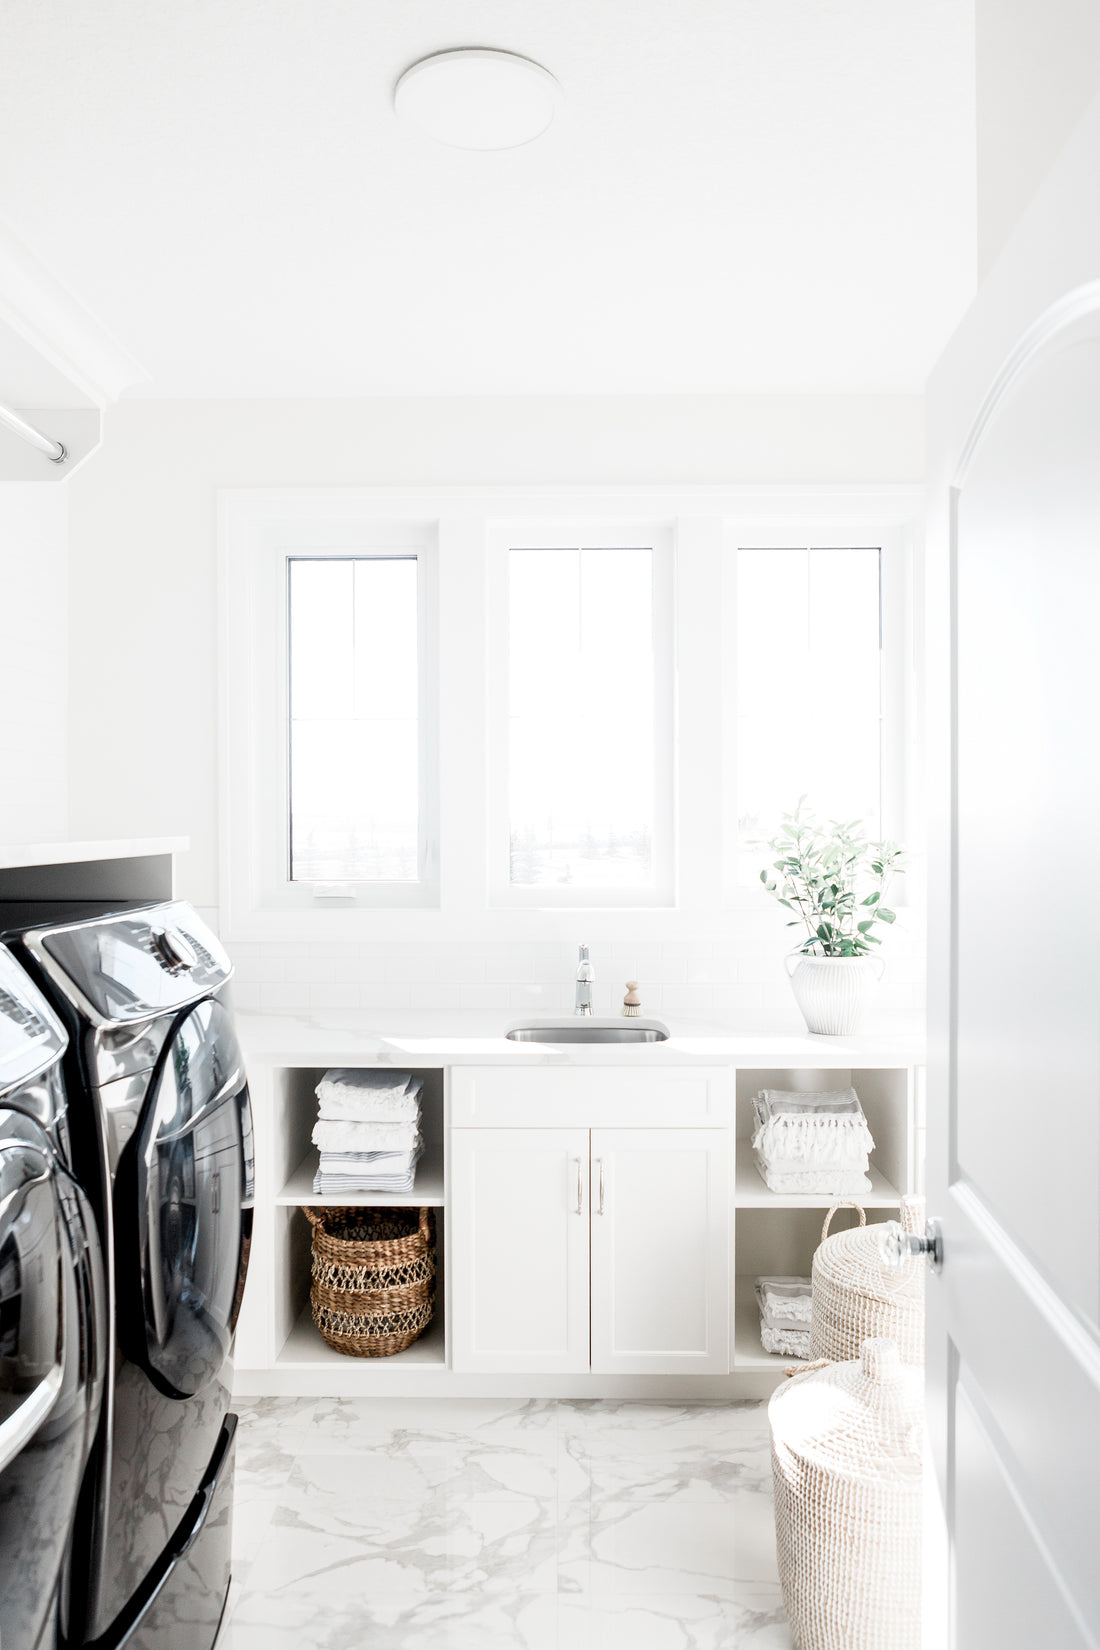 Bright white laundry room with front-loading washing machine and dryer on a pedestal, folded white towels, two woven laundry baskets.